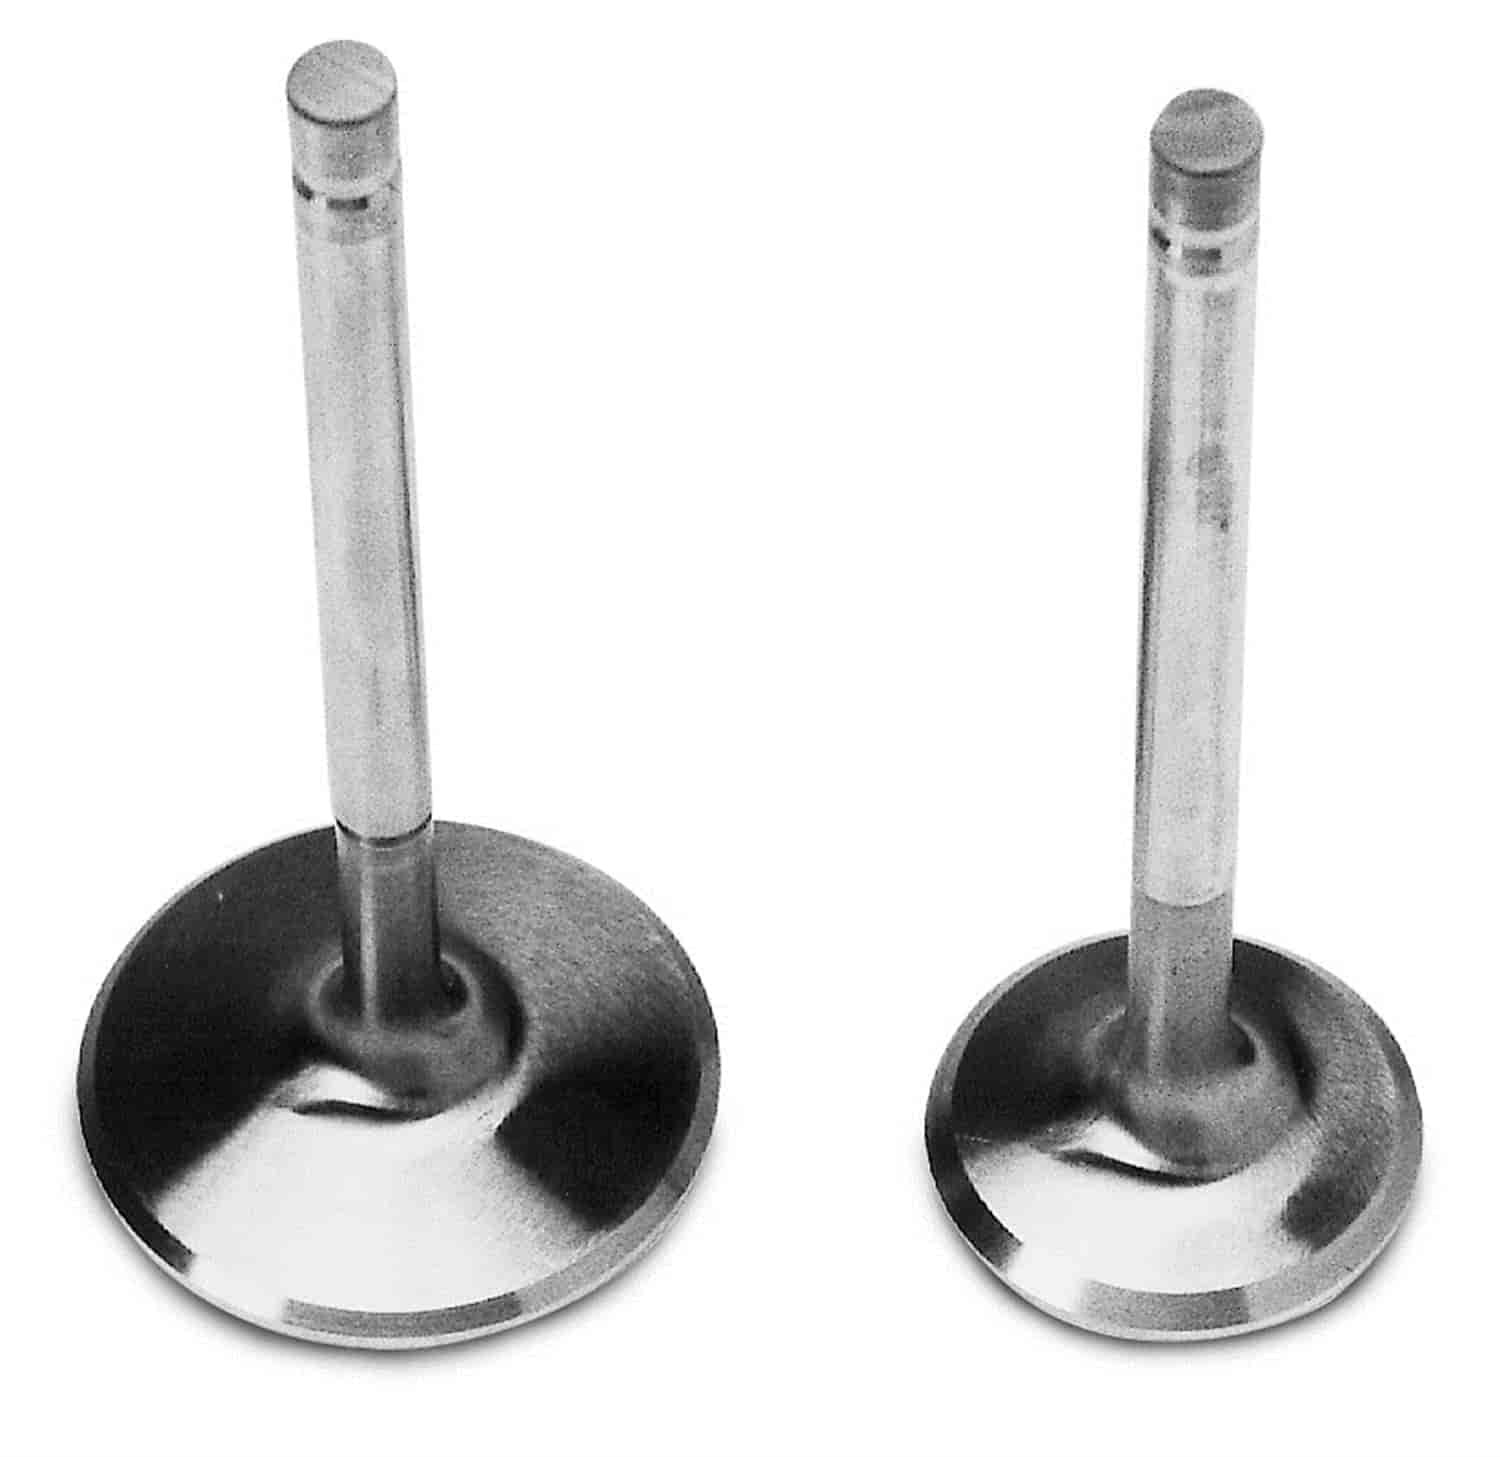 Single Exhaust Valve 1.72" for Chevy W-Series Performer RPM Heads #350-60809 & 350-60819